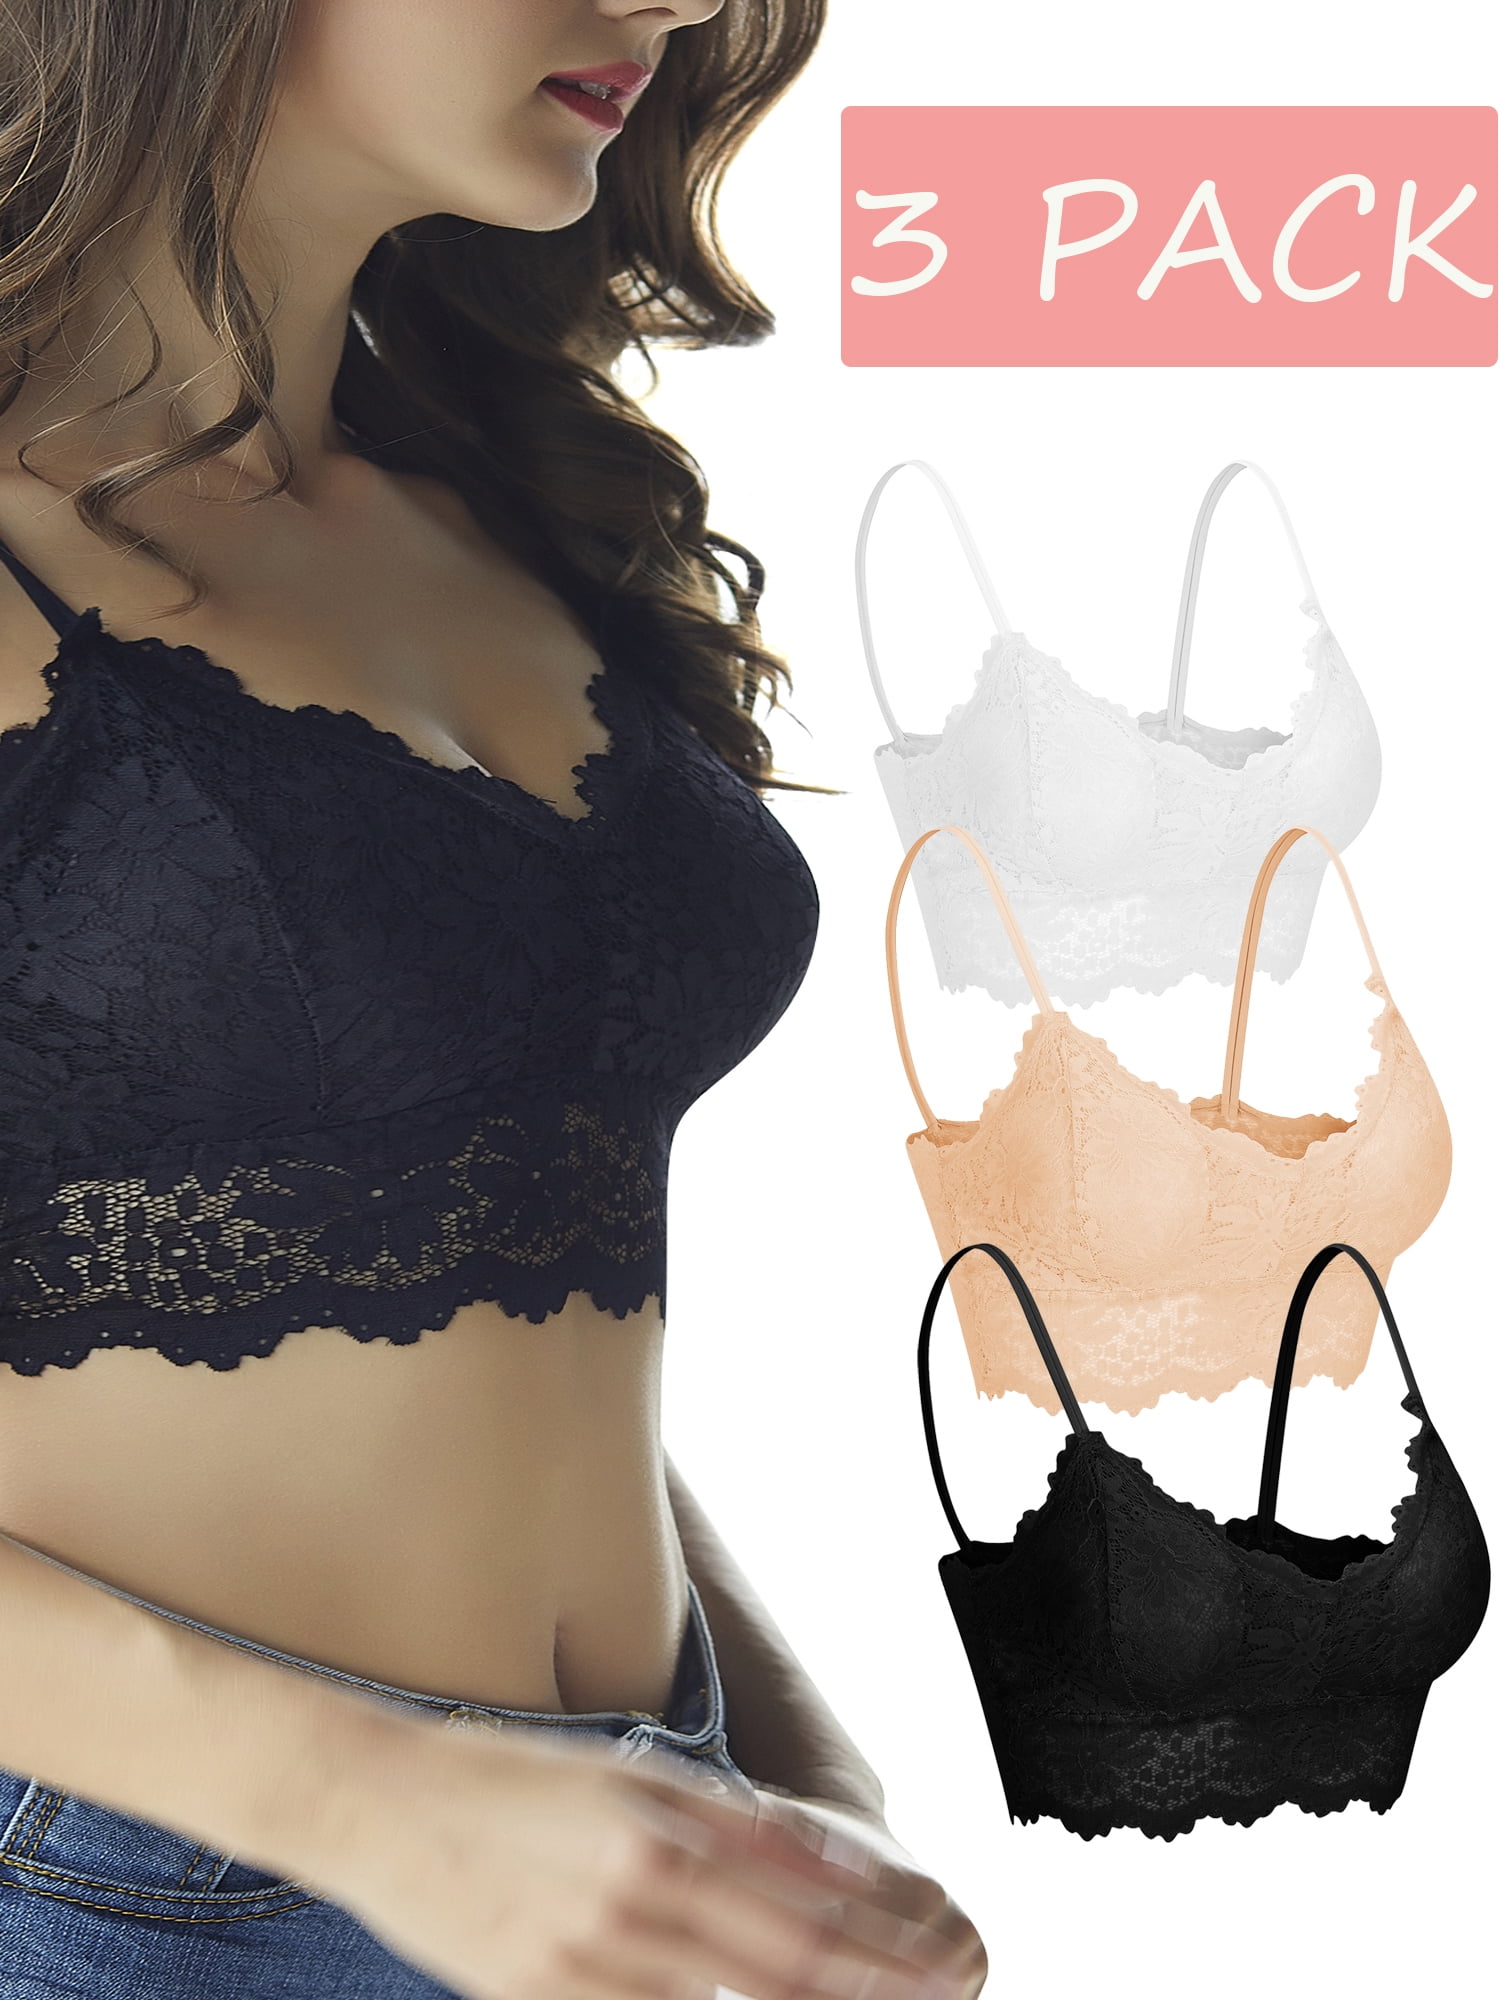 SHCKE 3 PACK Lace Bralette for Women Padded Lace Bandeau Bra with